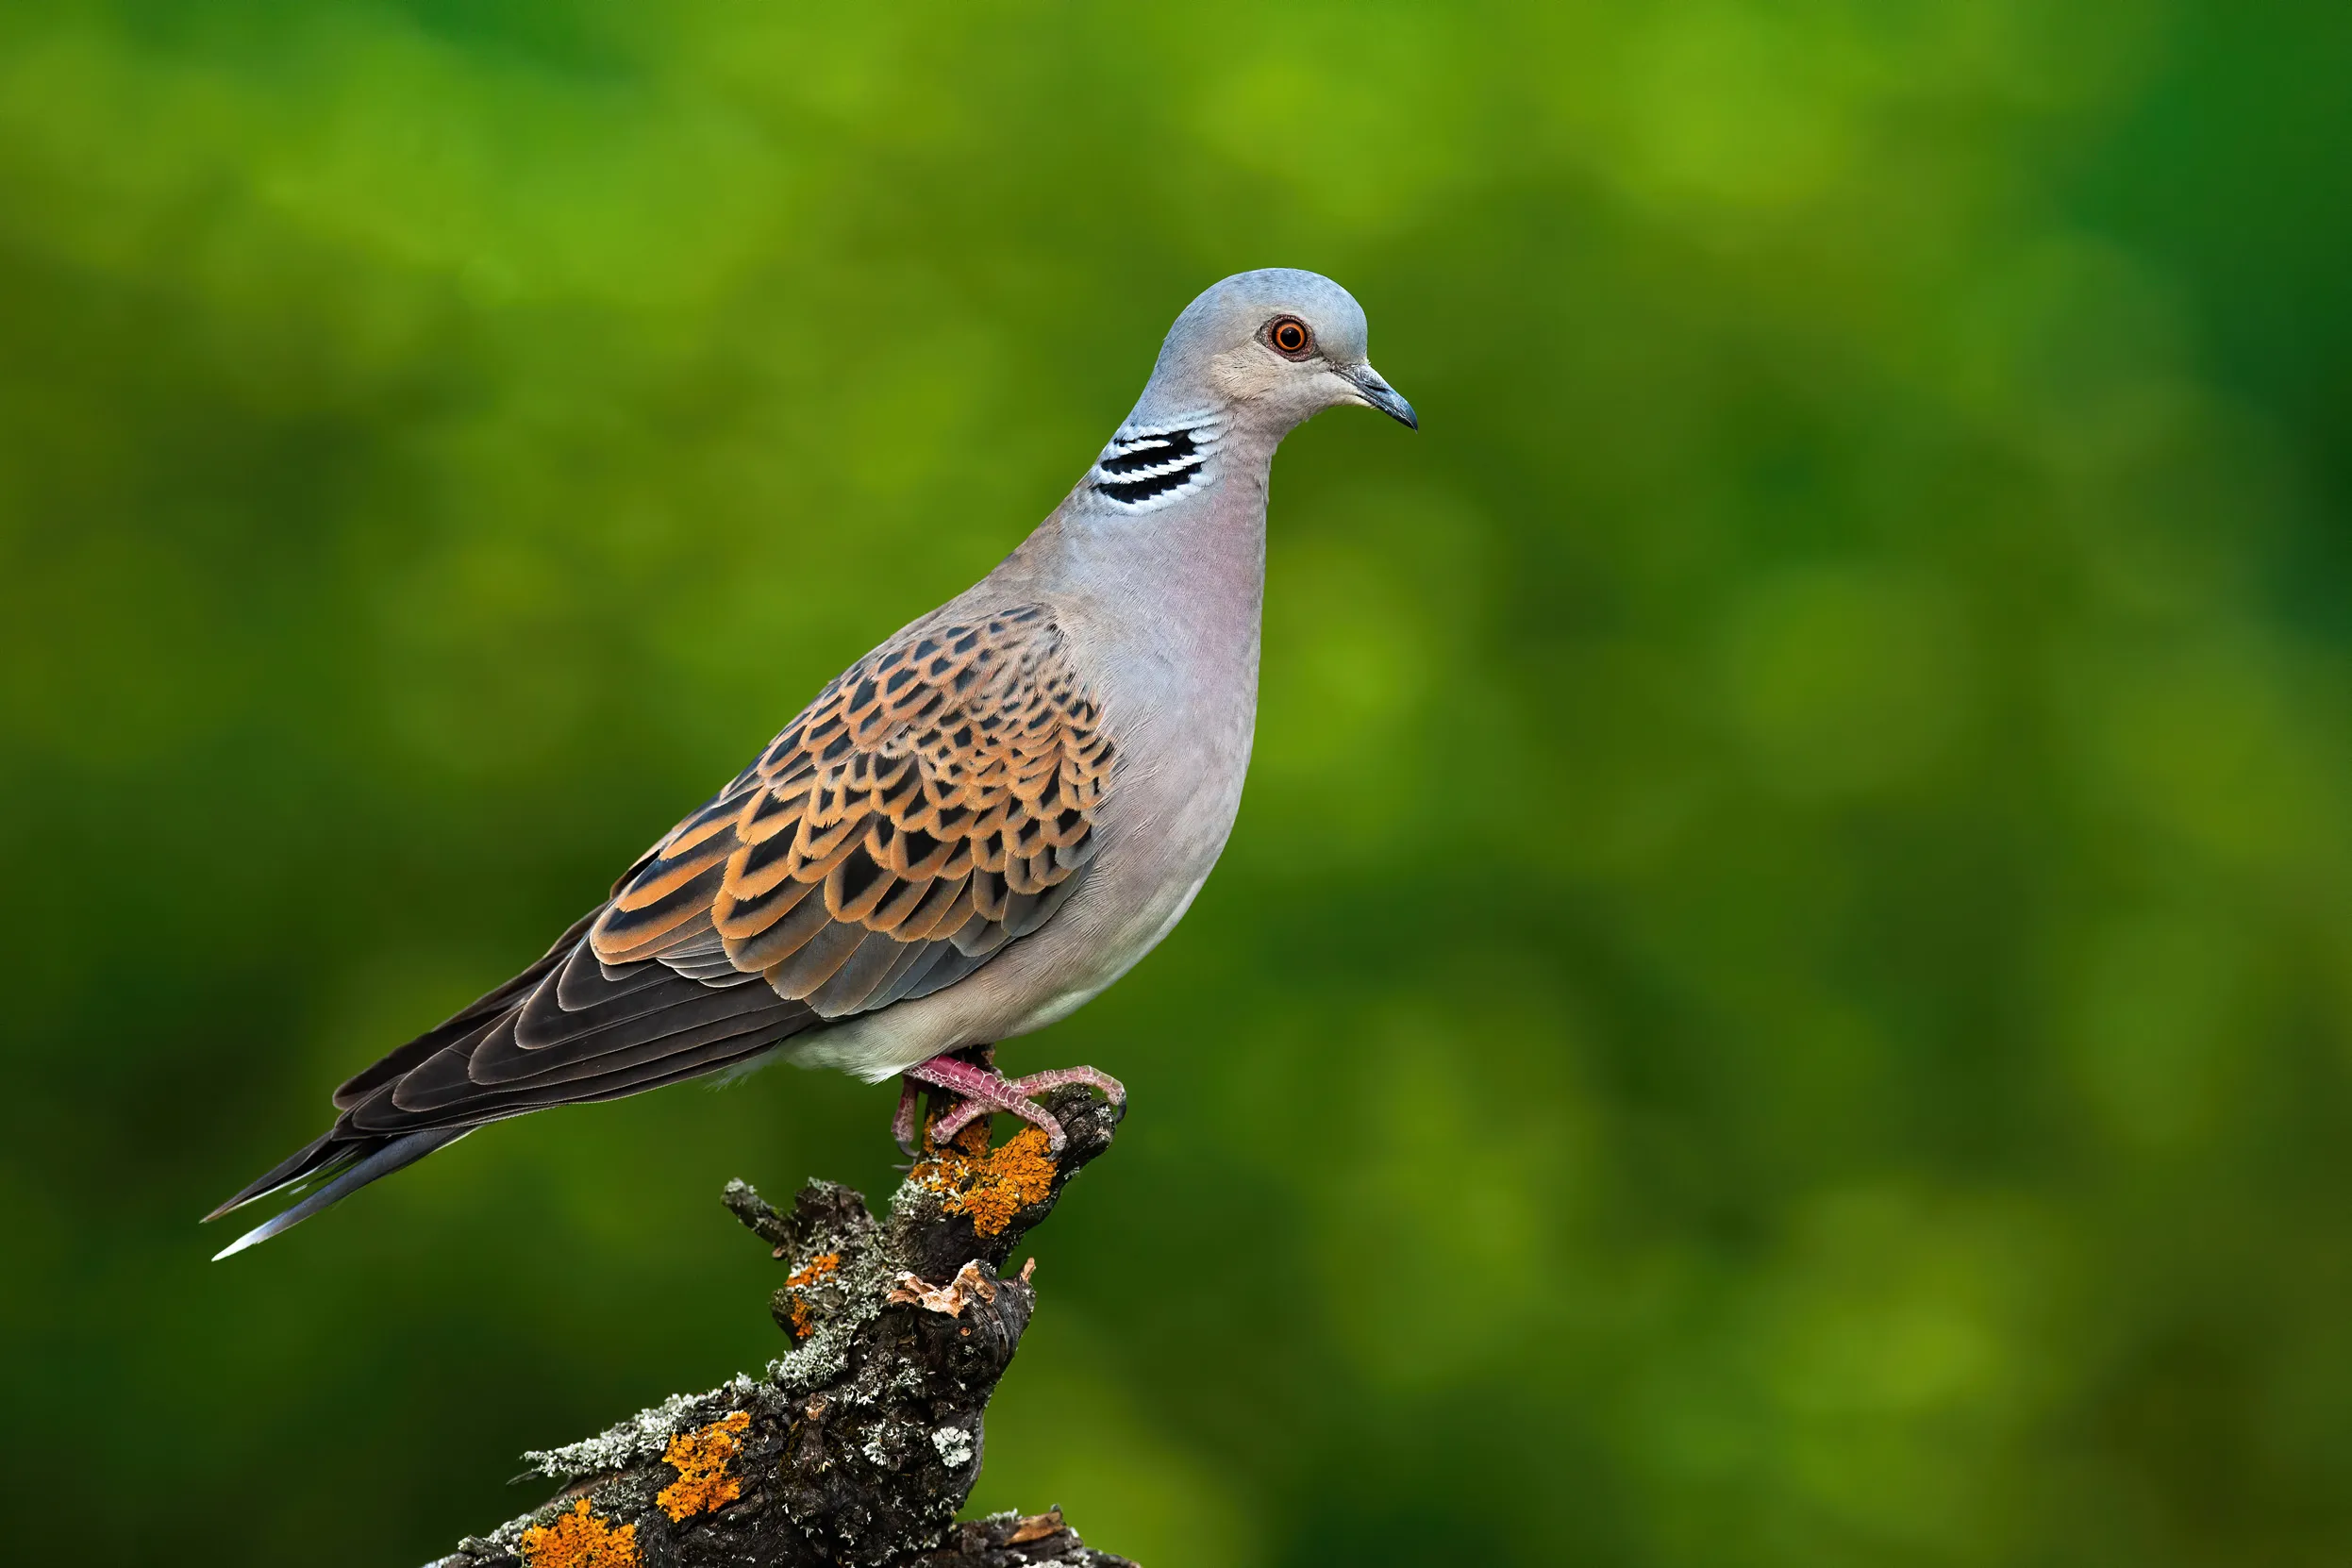 A lone Turtle Dove perched on a branch.